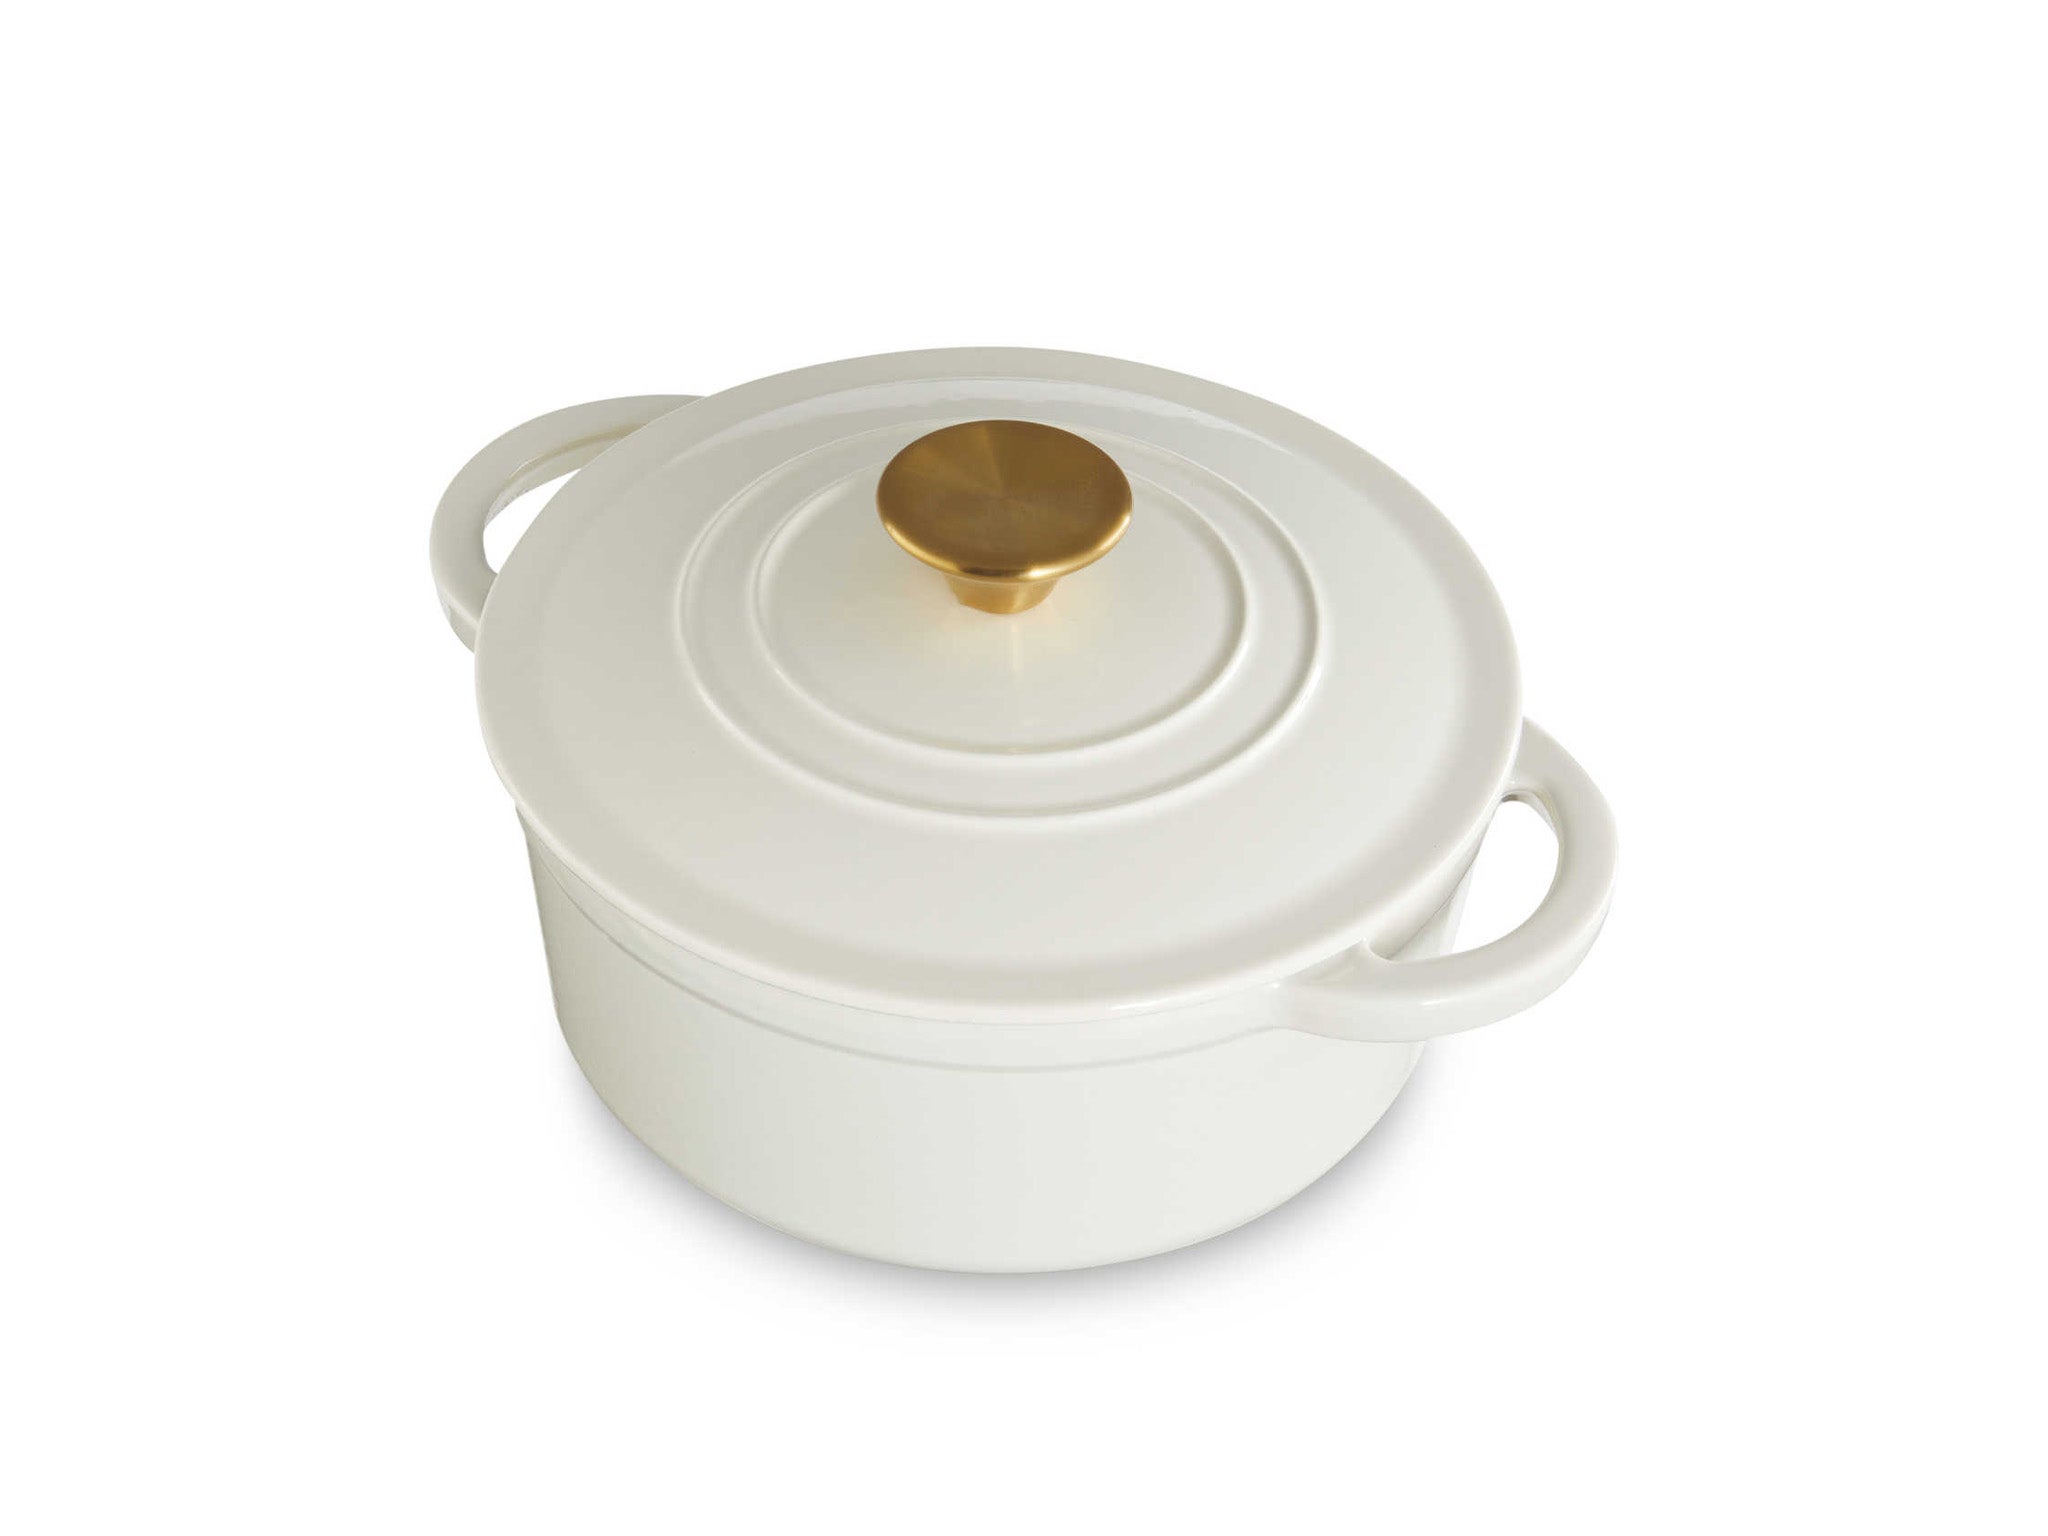 Aldi Special Buys: $25 dupe of $400 Le Creuset on sale May 30